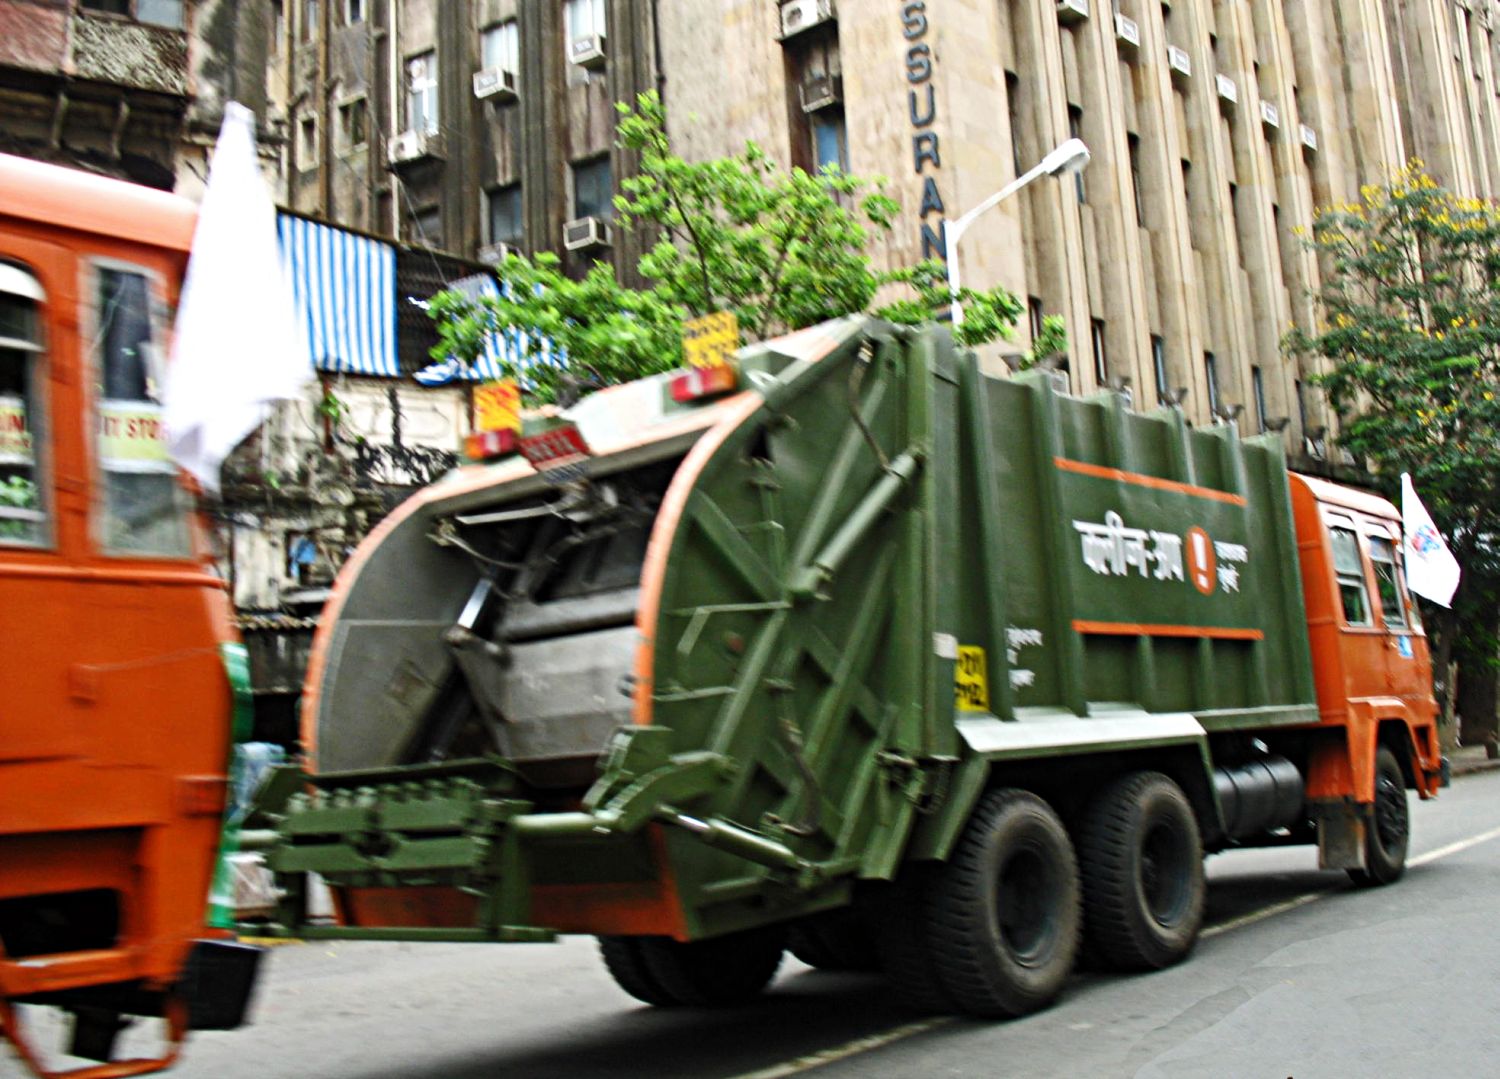 Stock Pictures: Garbage trucks or dumpers in India